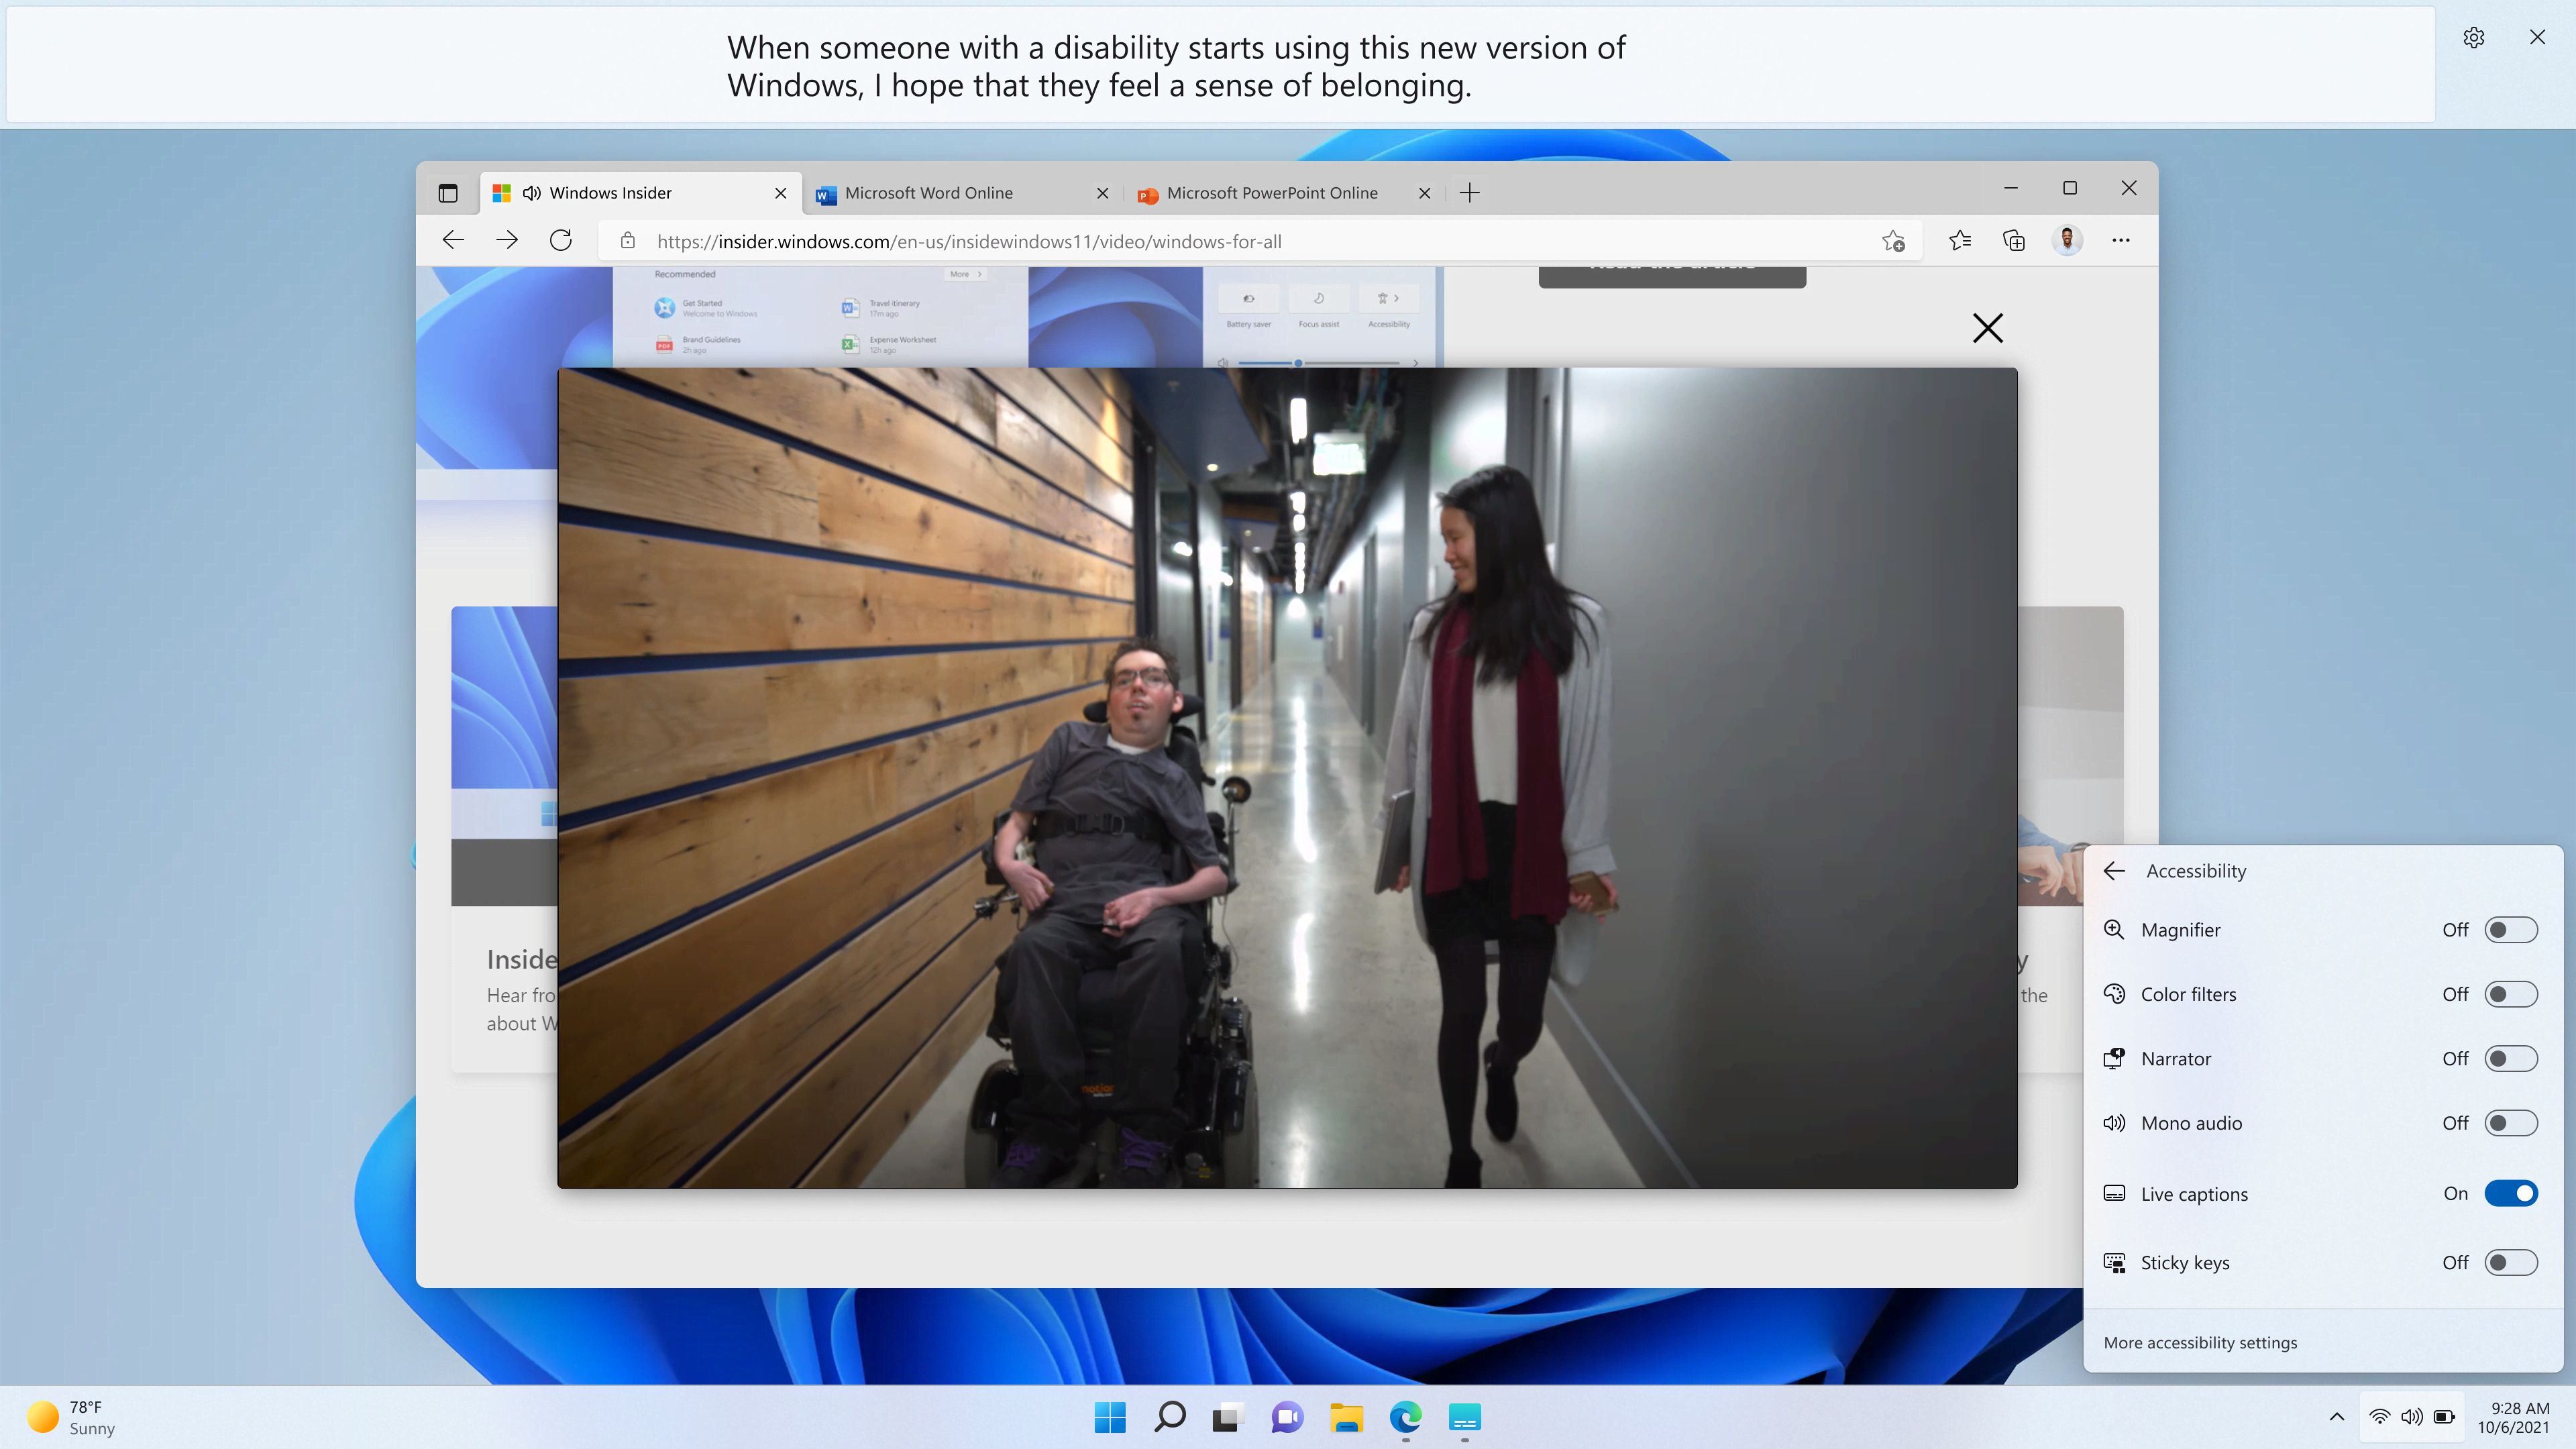 Windows 11 can provide captions for video and audio.